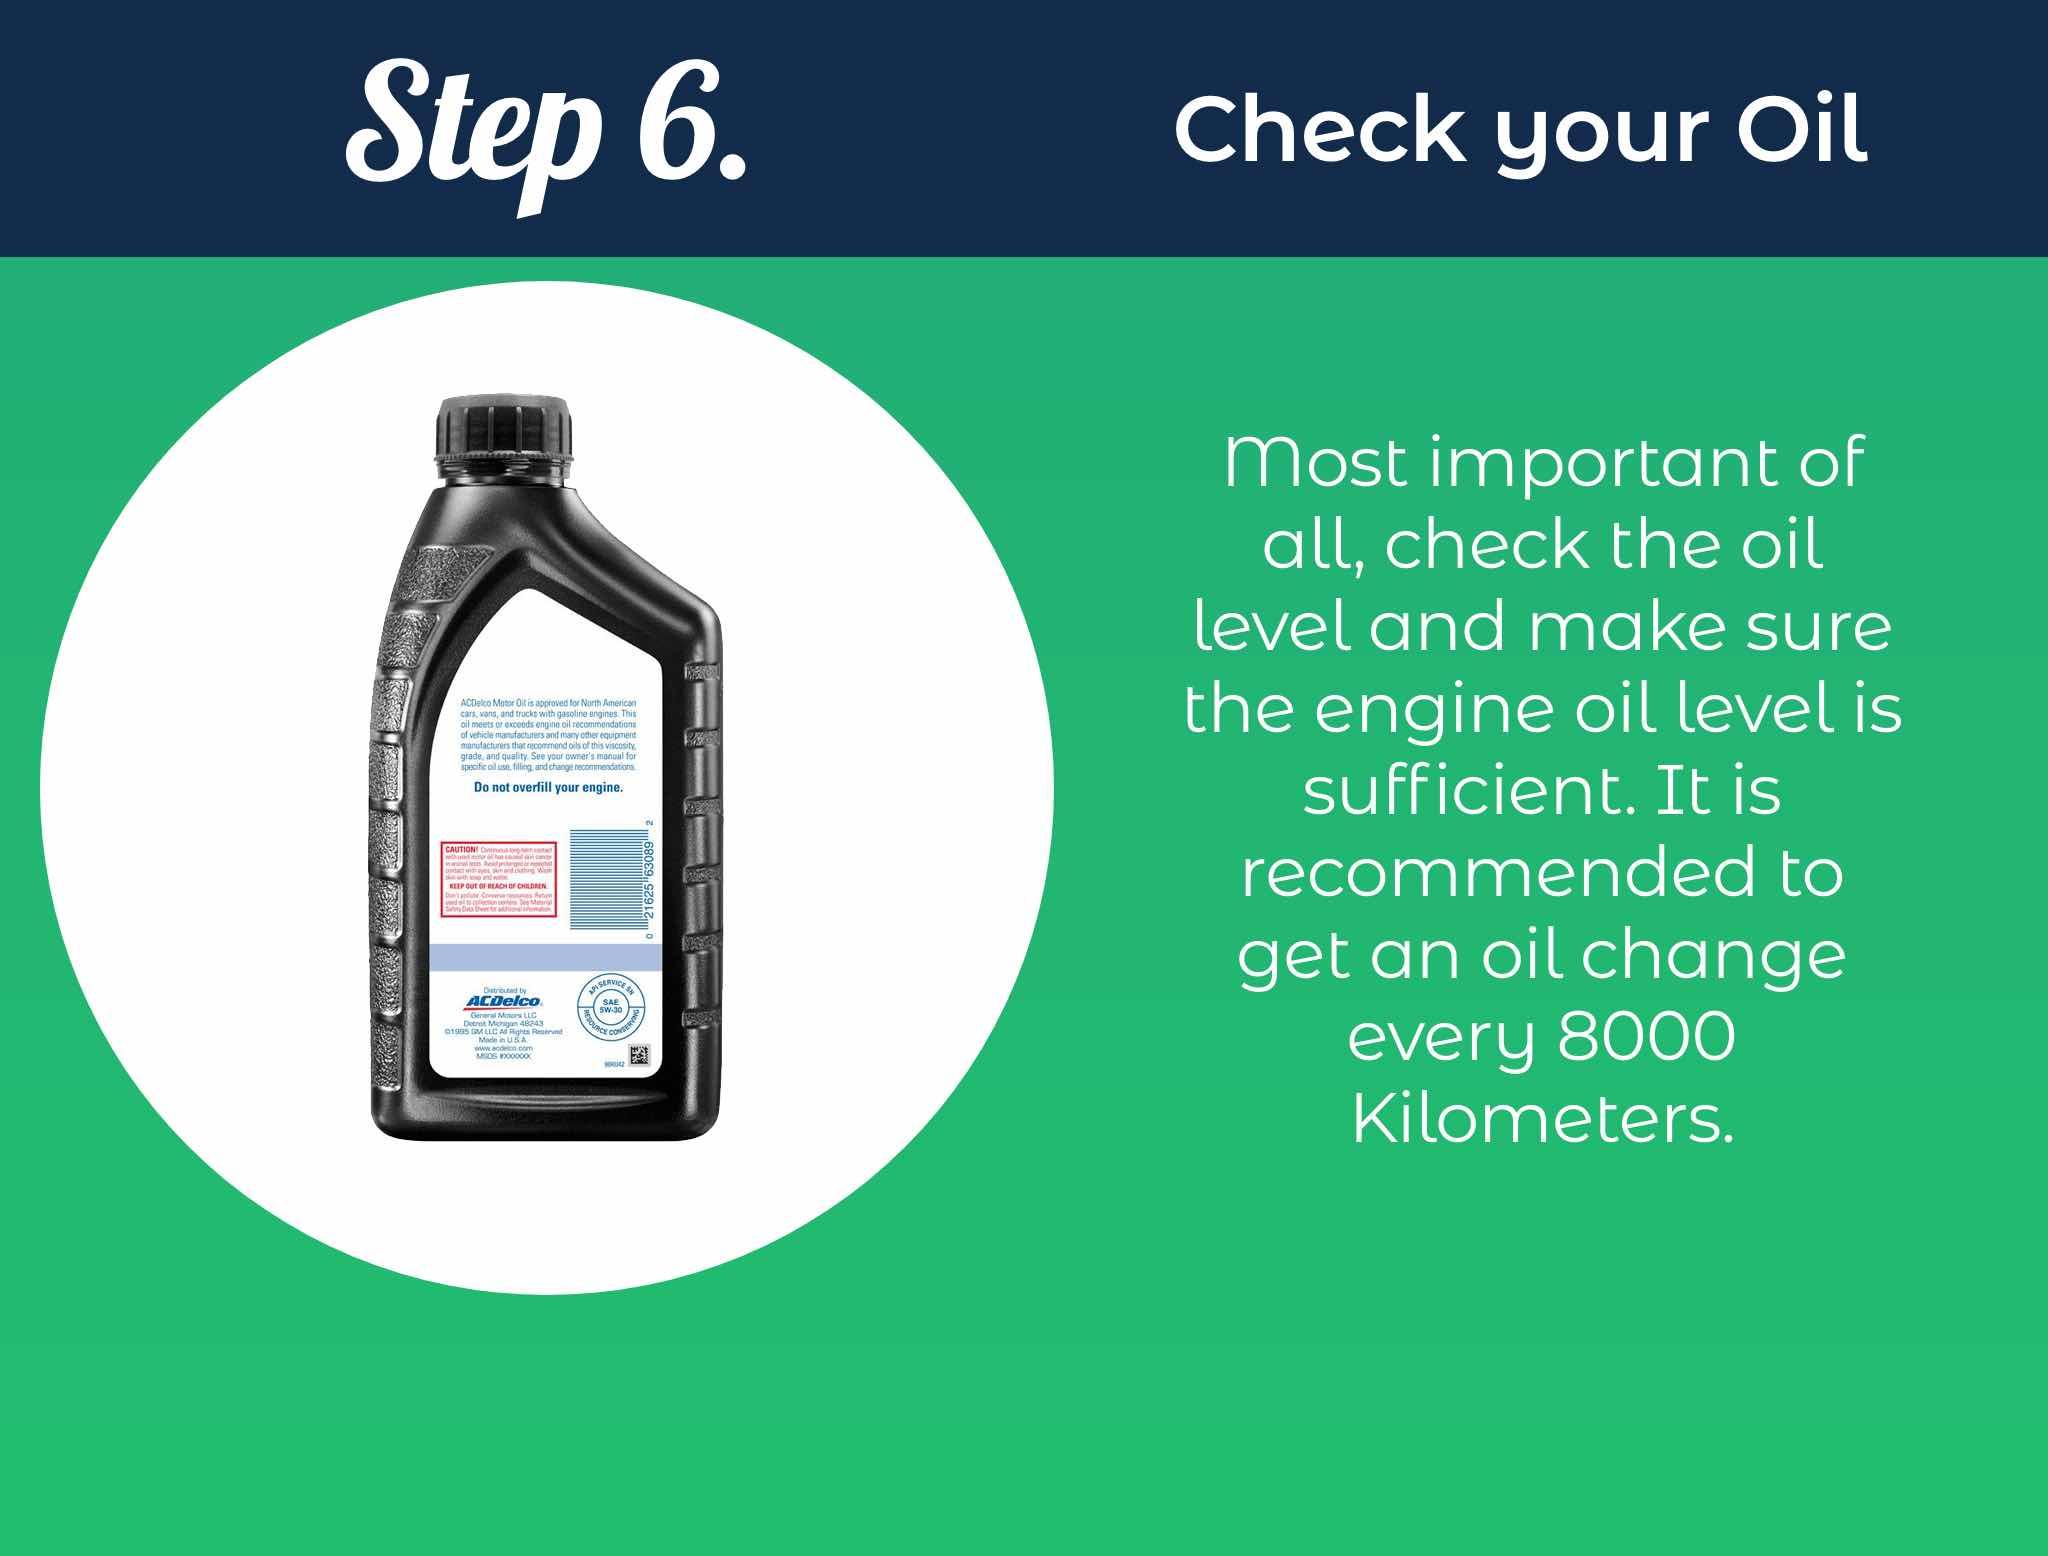 Most important of all, check the oil level and make sure the engine oil level is sufficient. It is recommended to get an oil change every 8000 Kilometers.